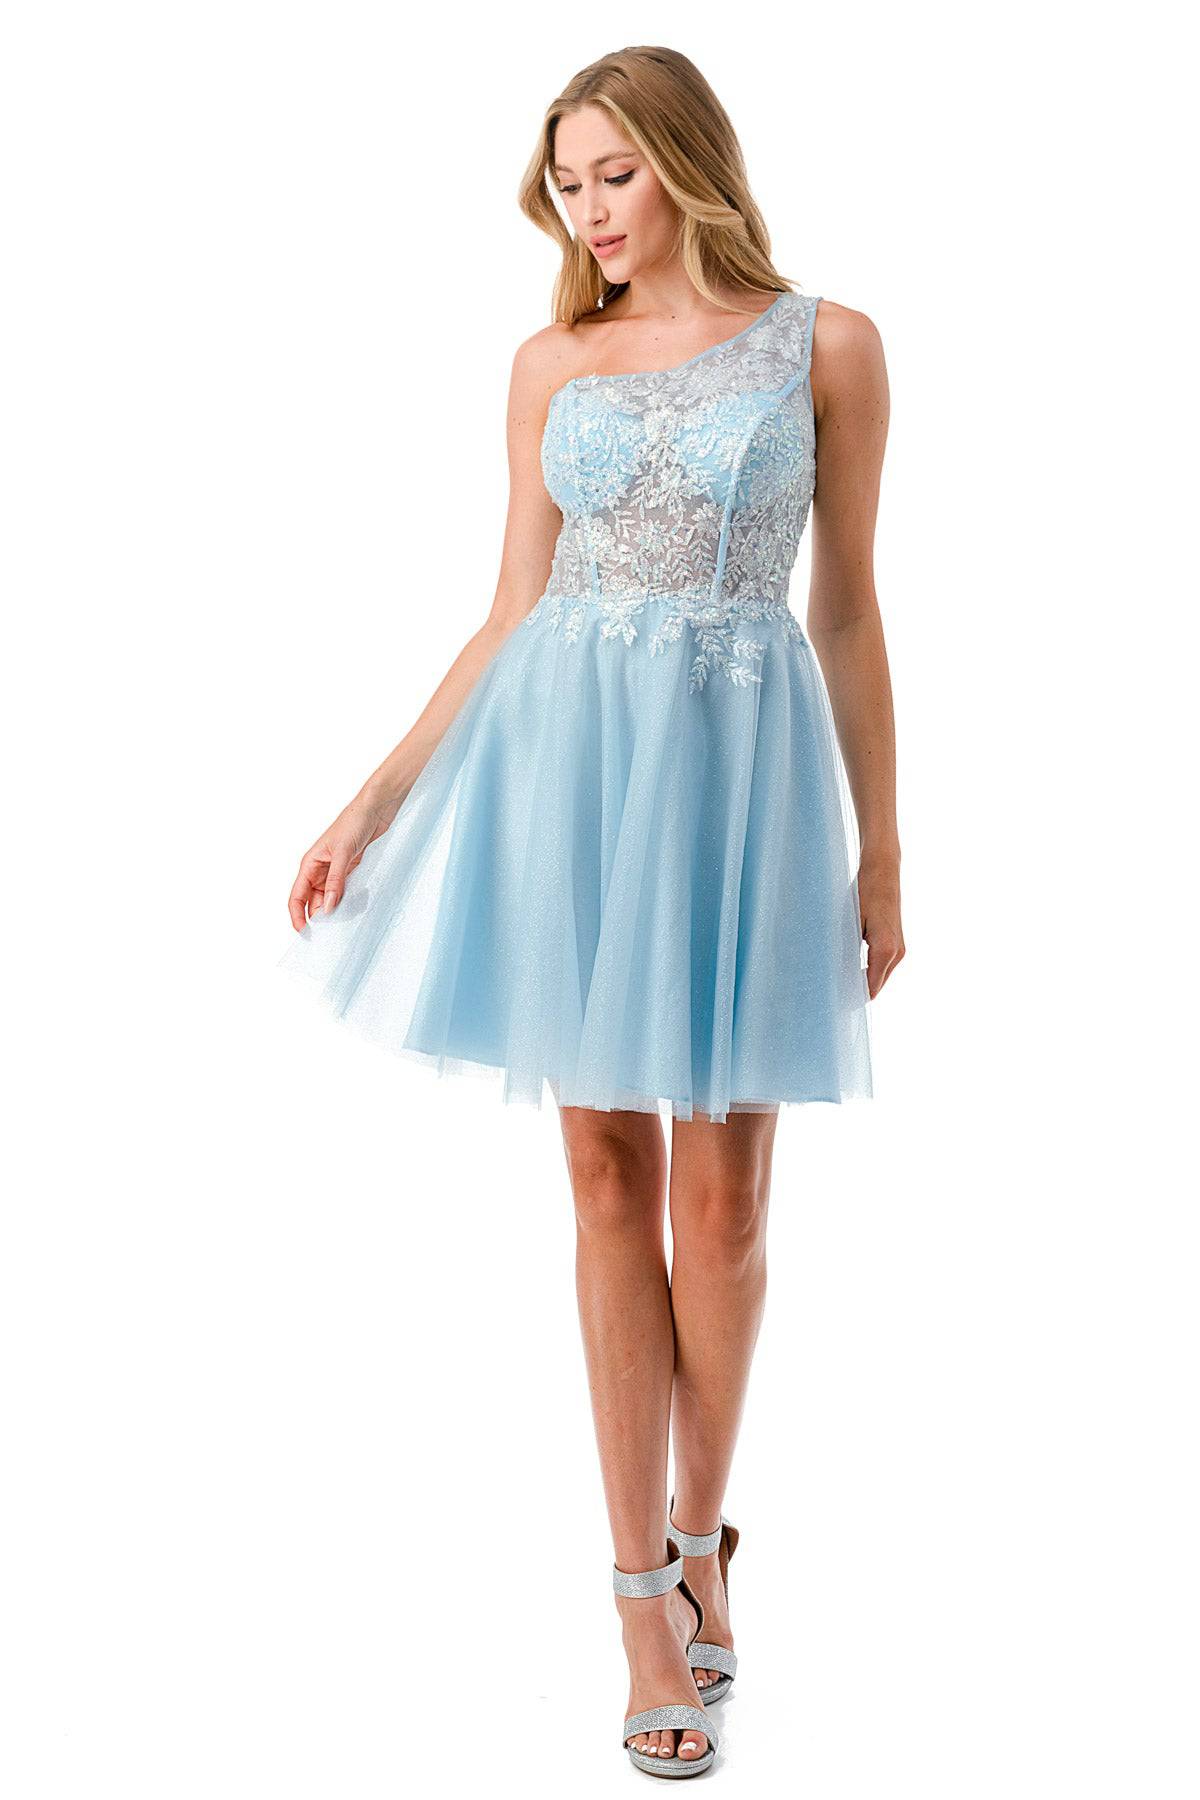 Aspeed S2723 Light Blue One Shoulder Lace & Sheer Short Dress - NORMA REED